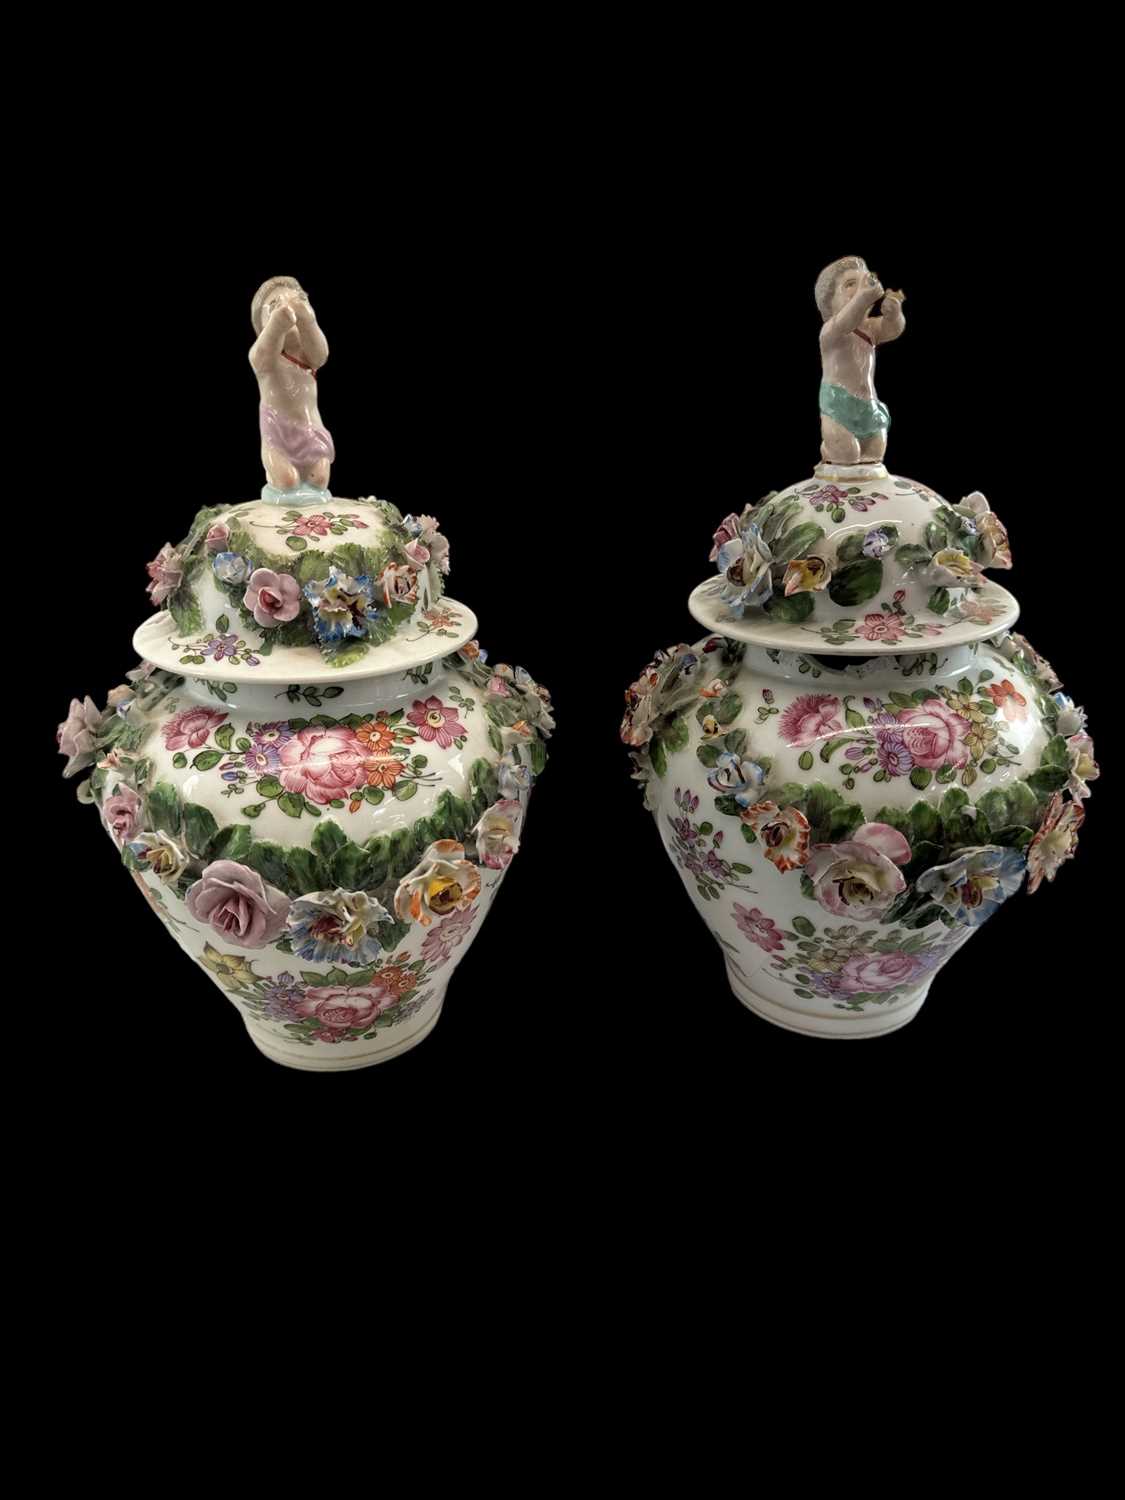 A pair of 19th century Continental floral encrusted and hand painted lidded urns with cherub